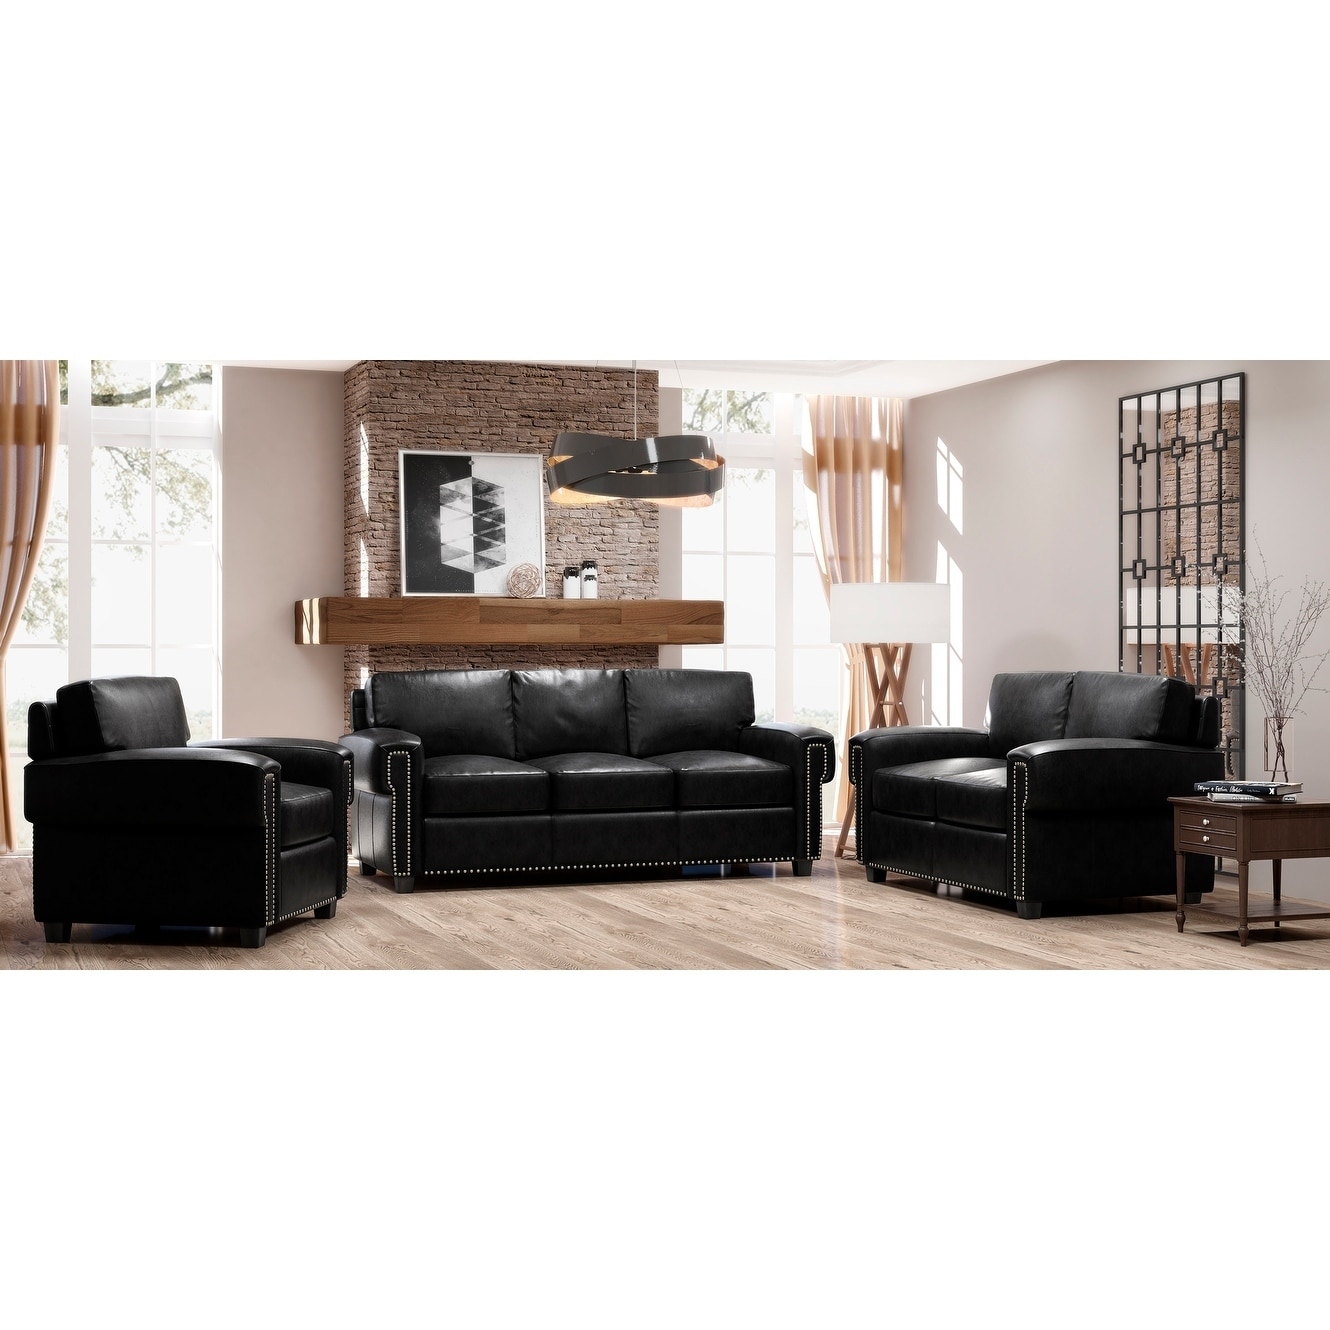 Made To Order Como 100 Top Grain Leather Sofa Loveseat And Chair Set